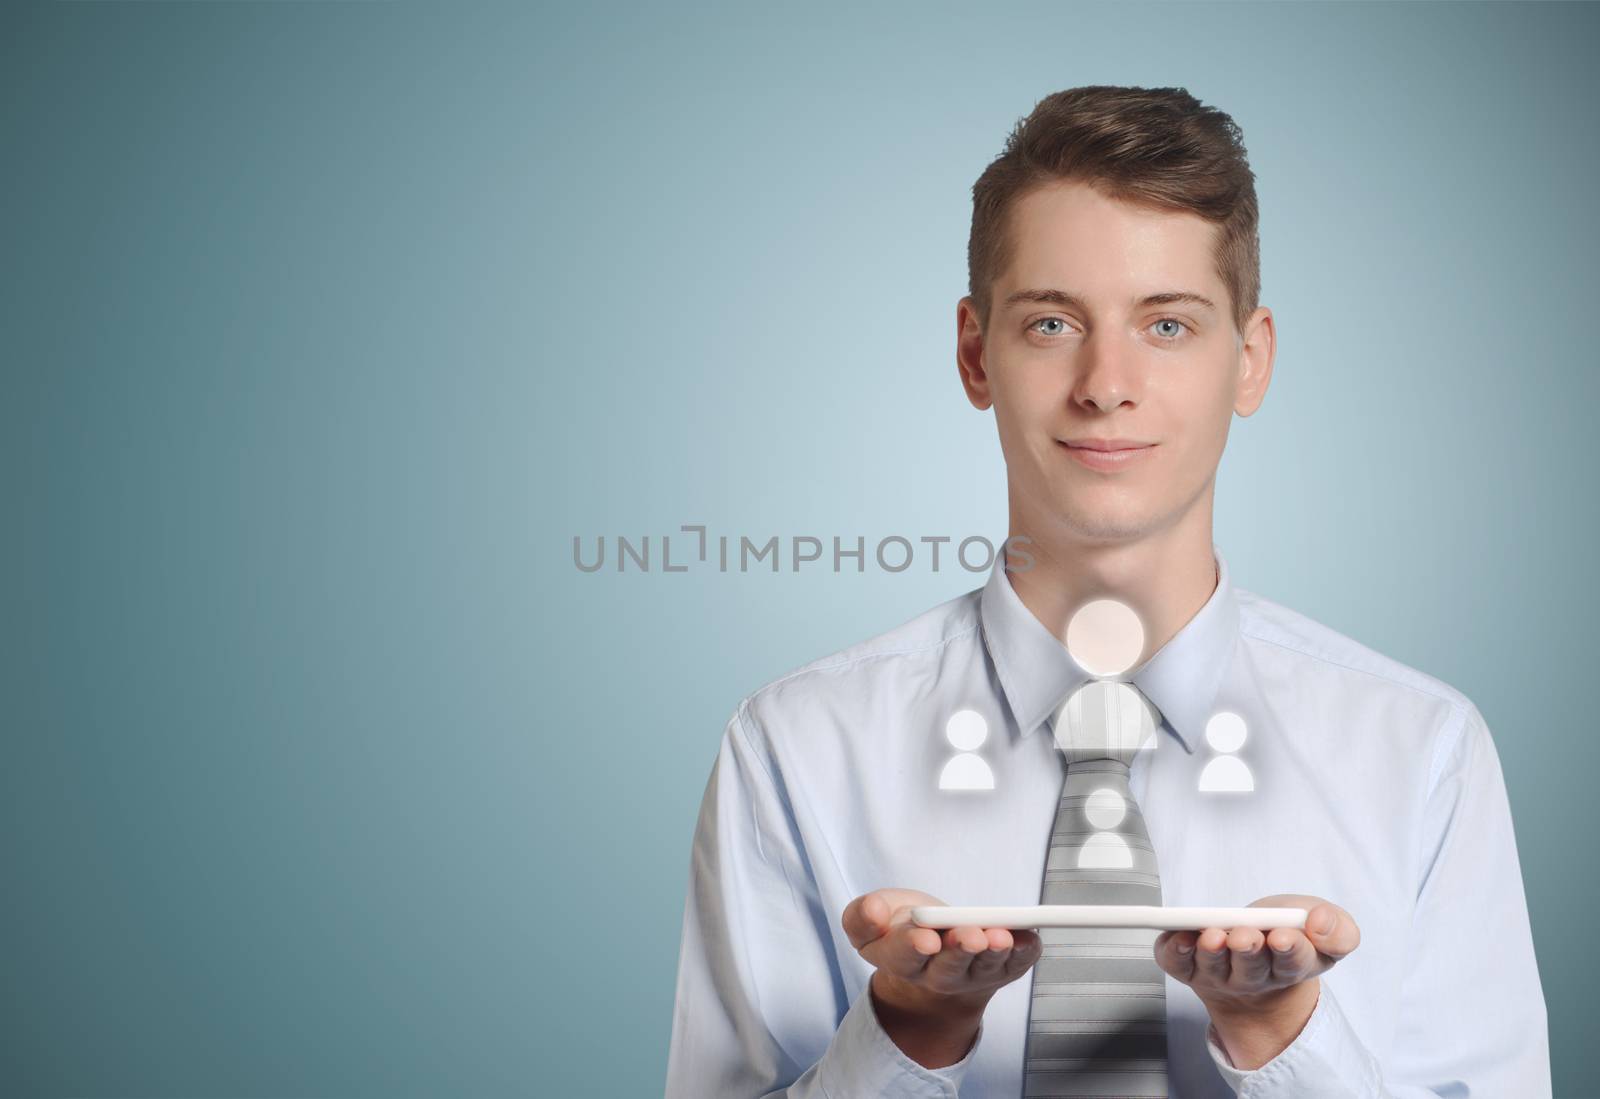 Businessman holding computer tablet with social media people icons in hands